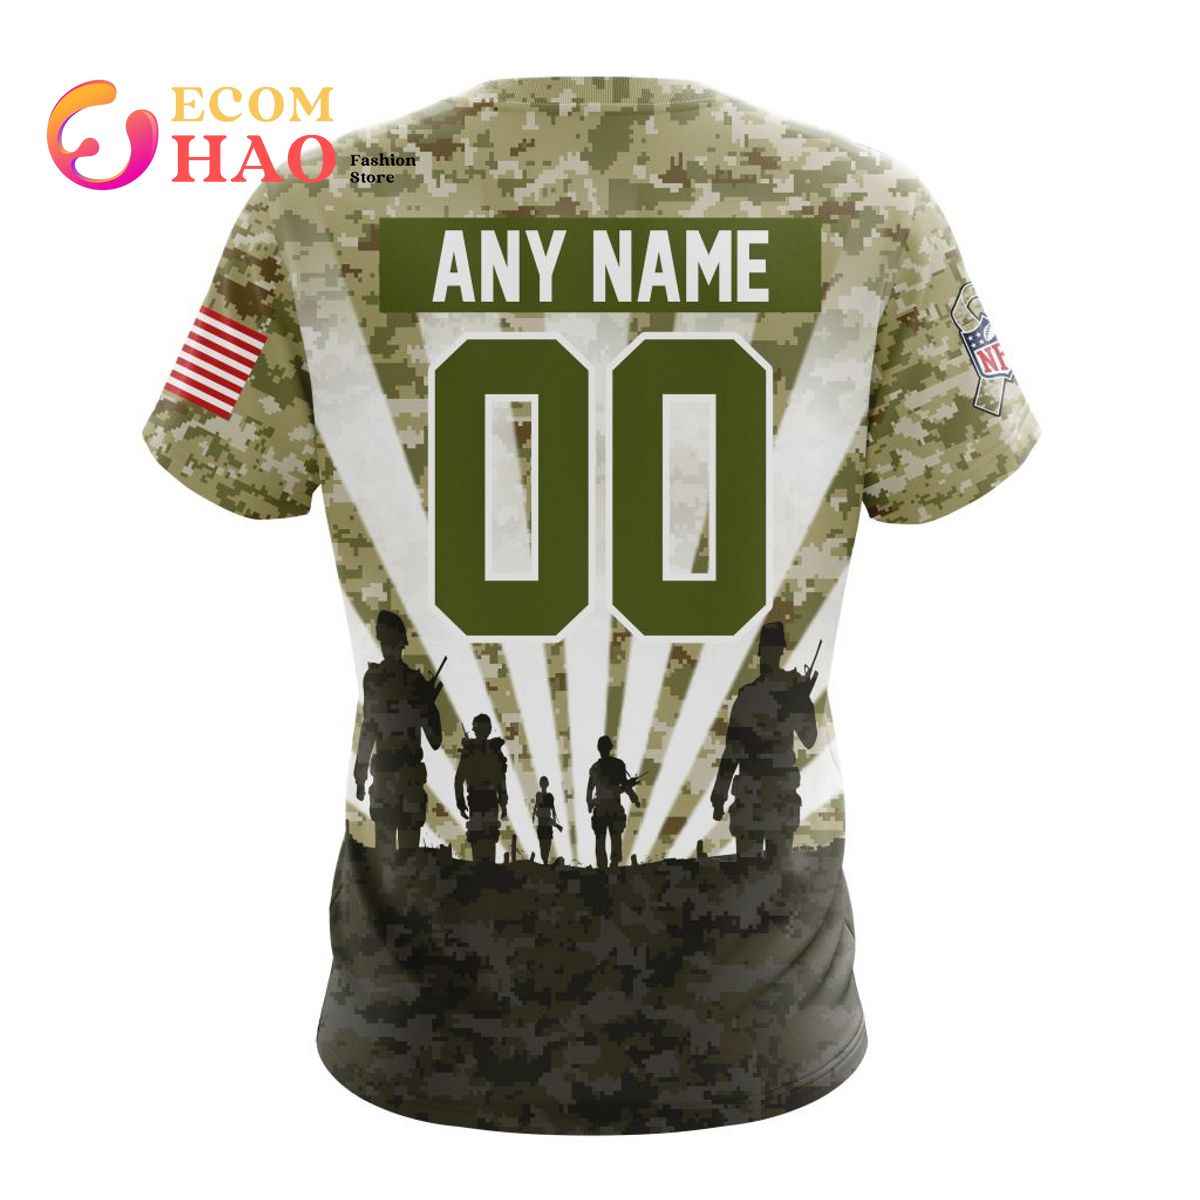 Miami Dolphins Shop - NFL Miami Dolphins Salute To Service Honor Veterans And Their Families T Shirt